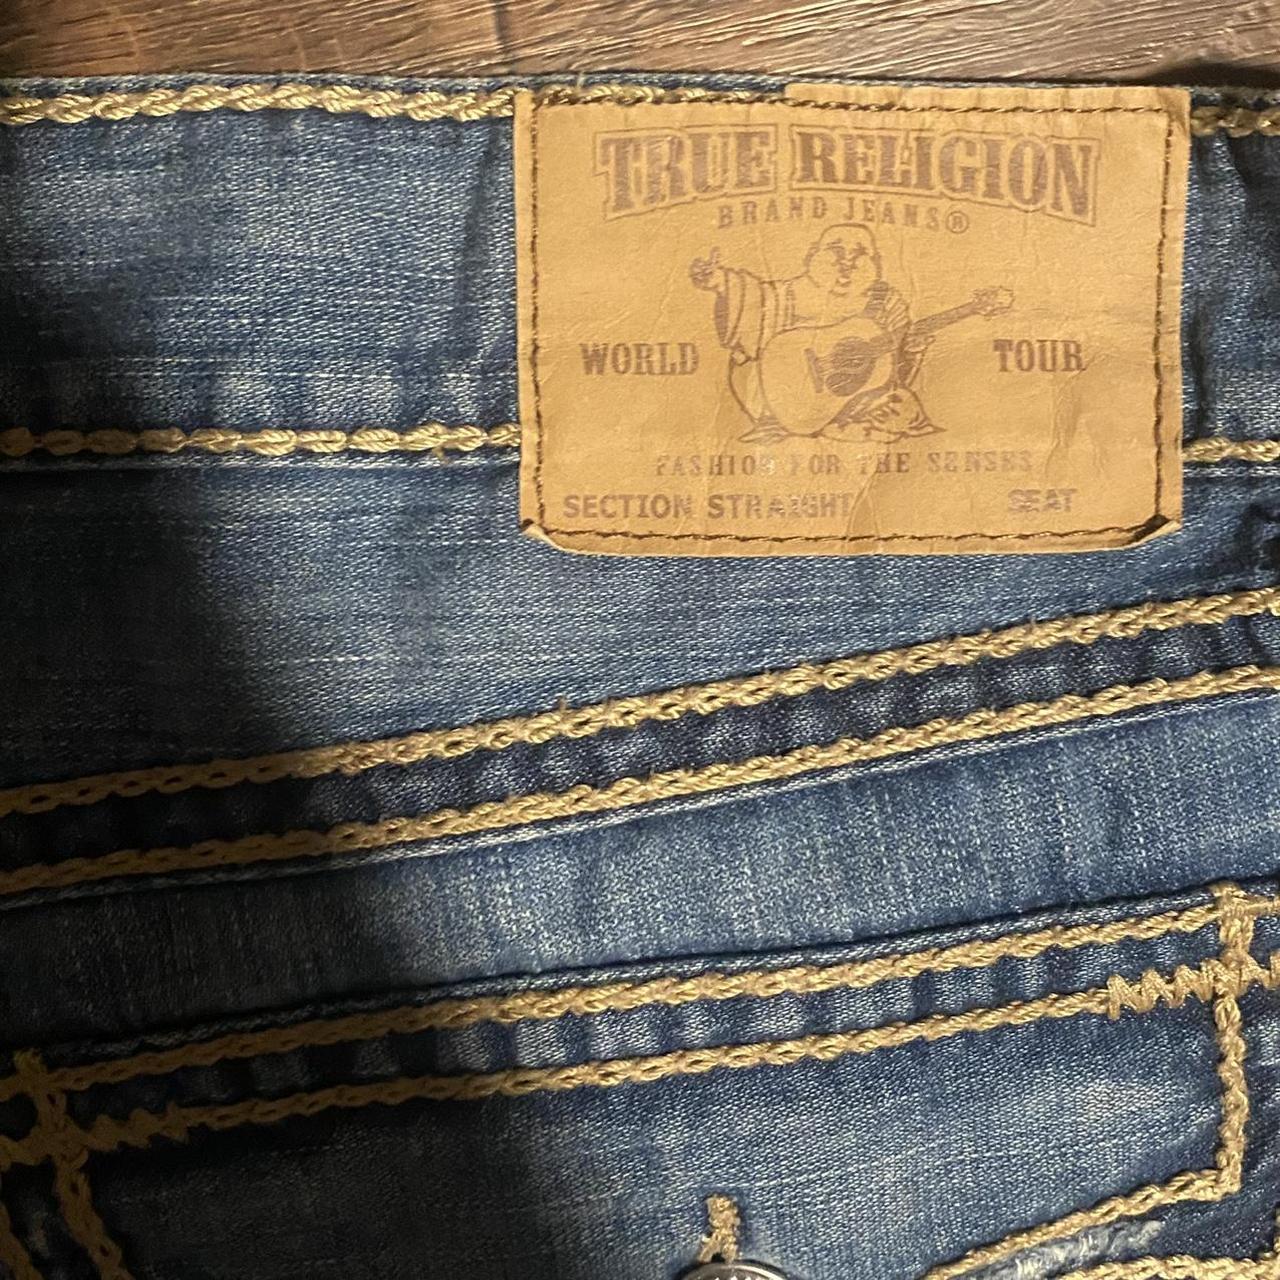 True Religion Rope stitch jeans Tagged Size 38 Cop... - Depop